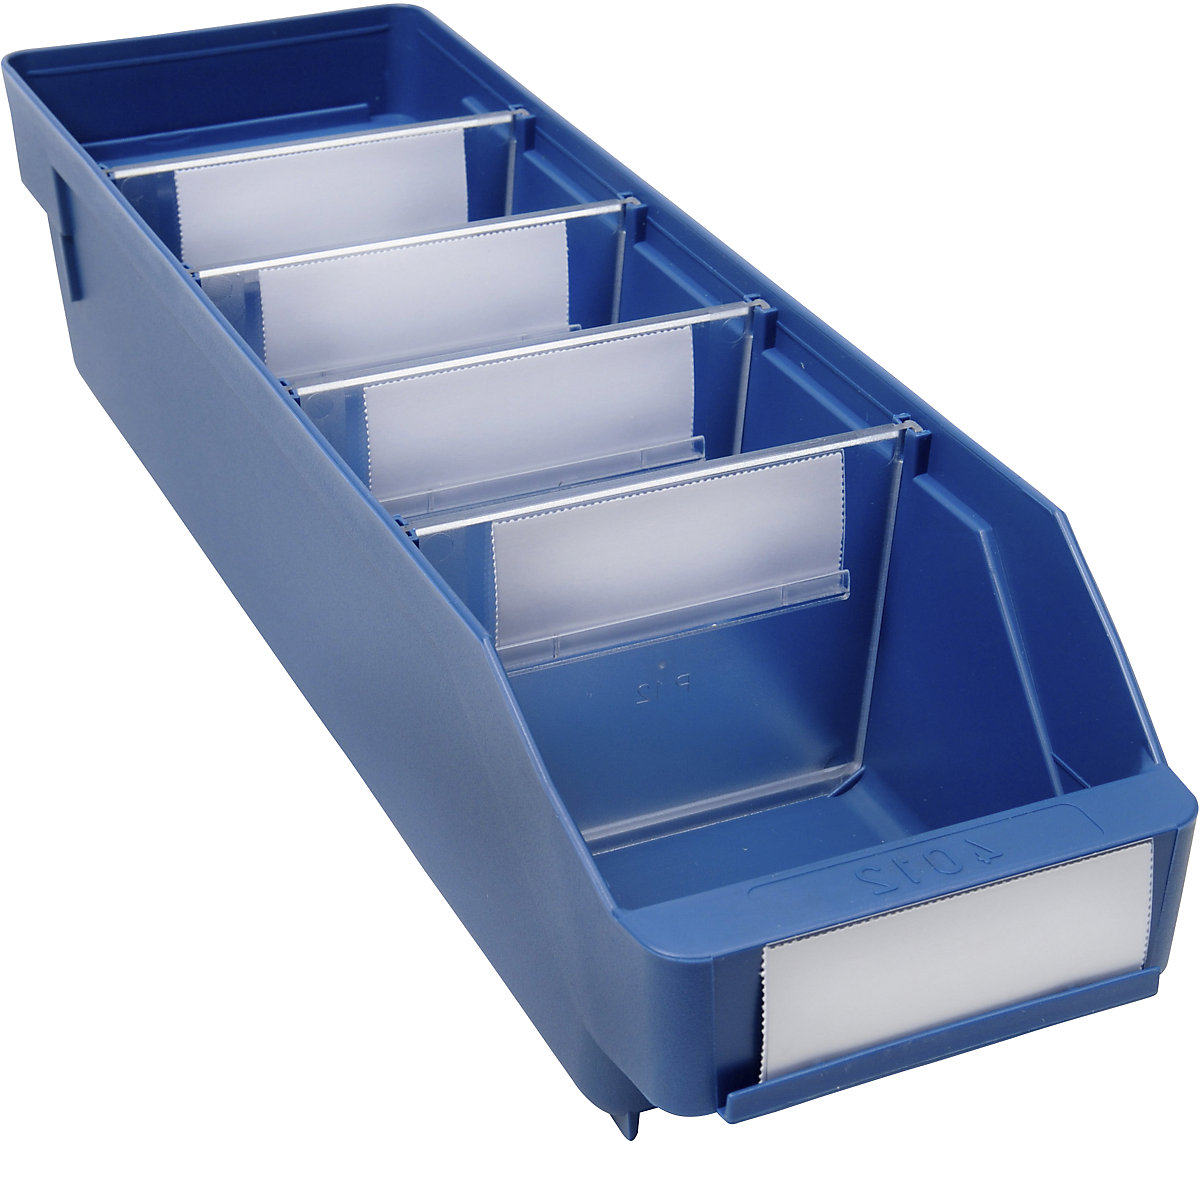 Shelf bin made of highly impact resistant polypropylene – STEMO, blue, LxWxH 400 x 118 x 95 mm, pack of 30-20